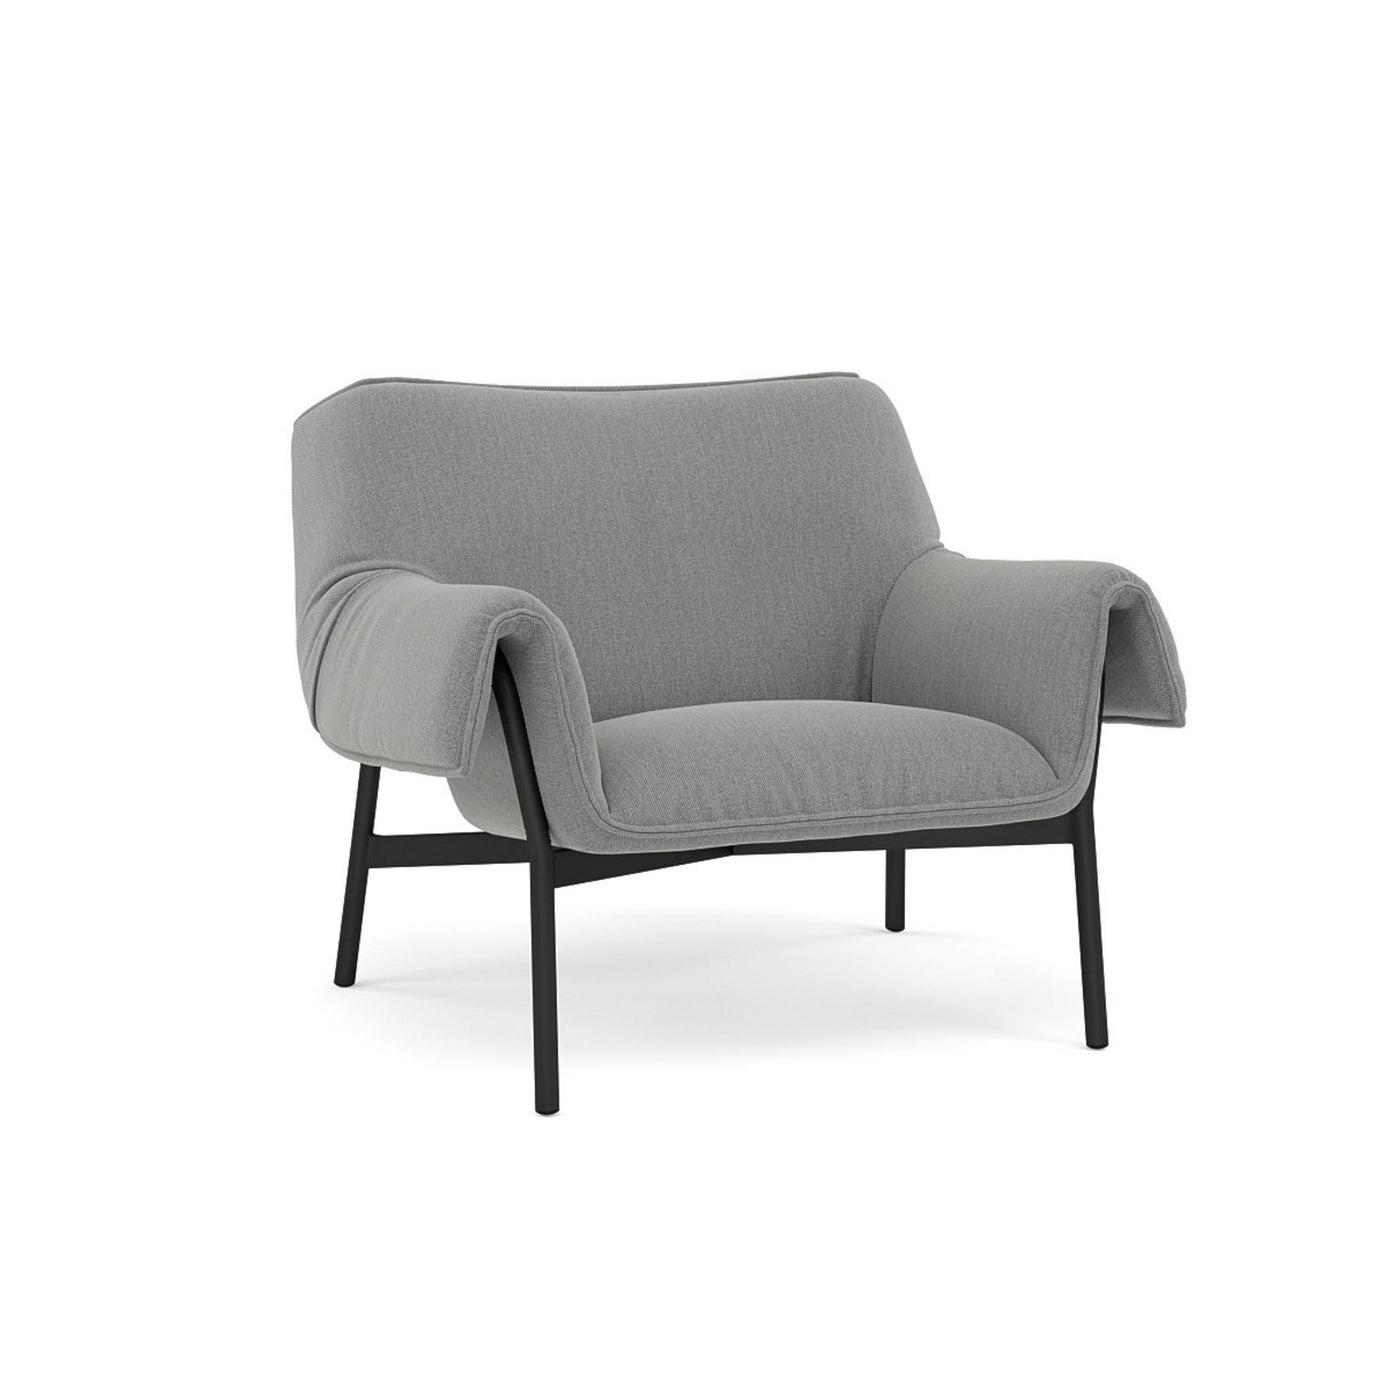 Muuto Wrap Lounge Chair. Made to order from someday designs. #colour_re-wool-128